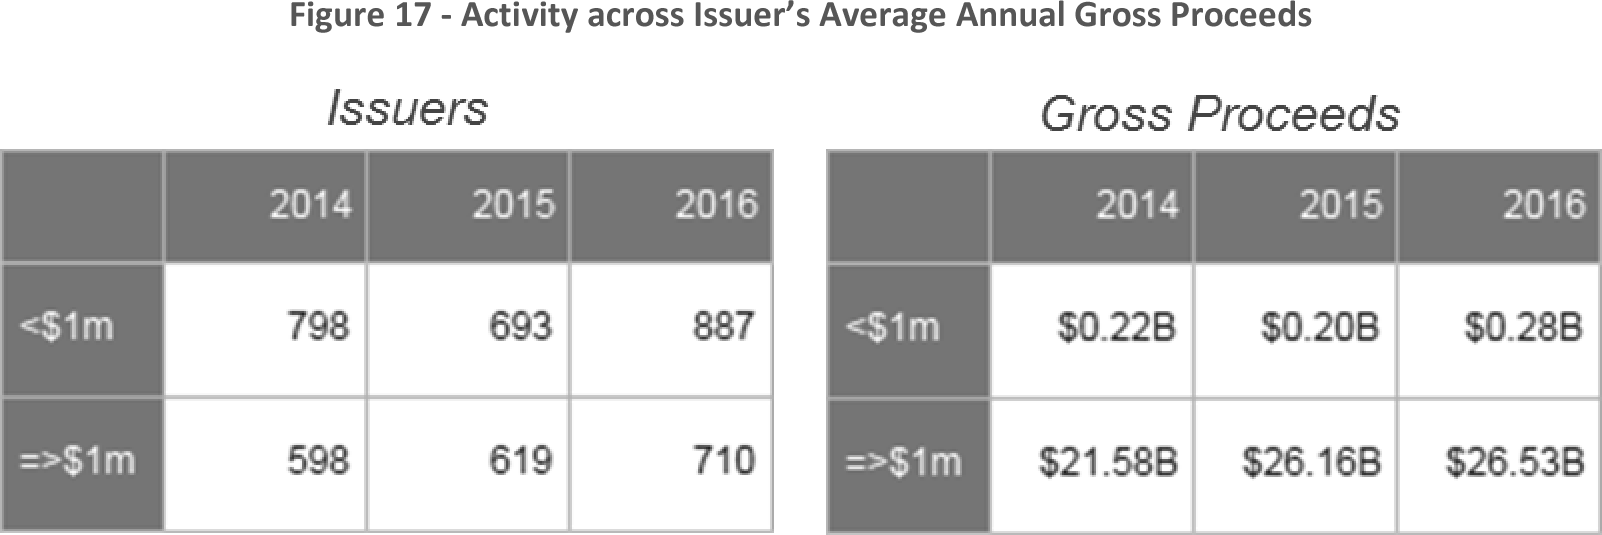 Figure 17 -- Activity across Issuer's Average Annual Gross Proceeds